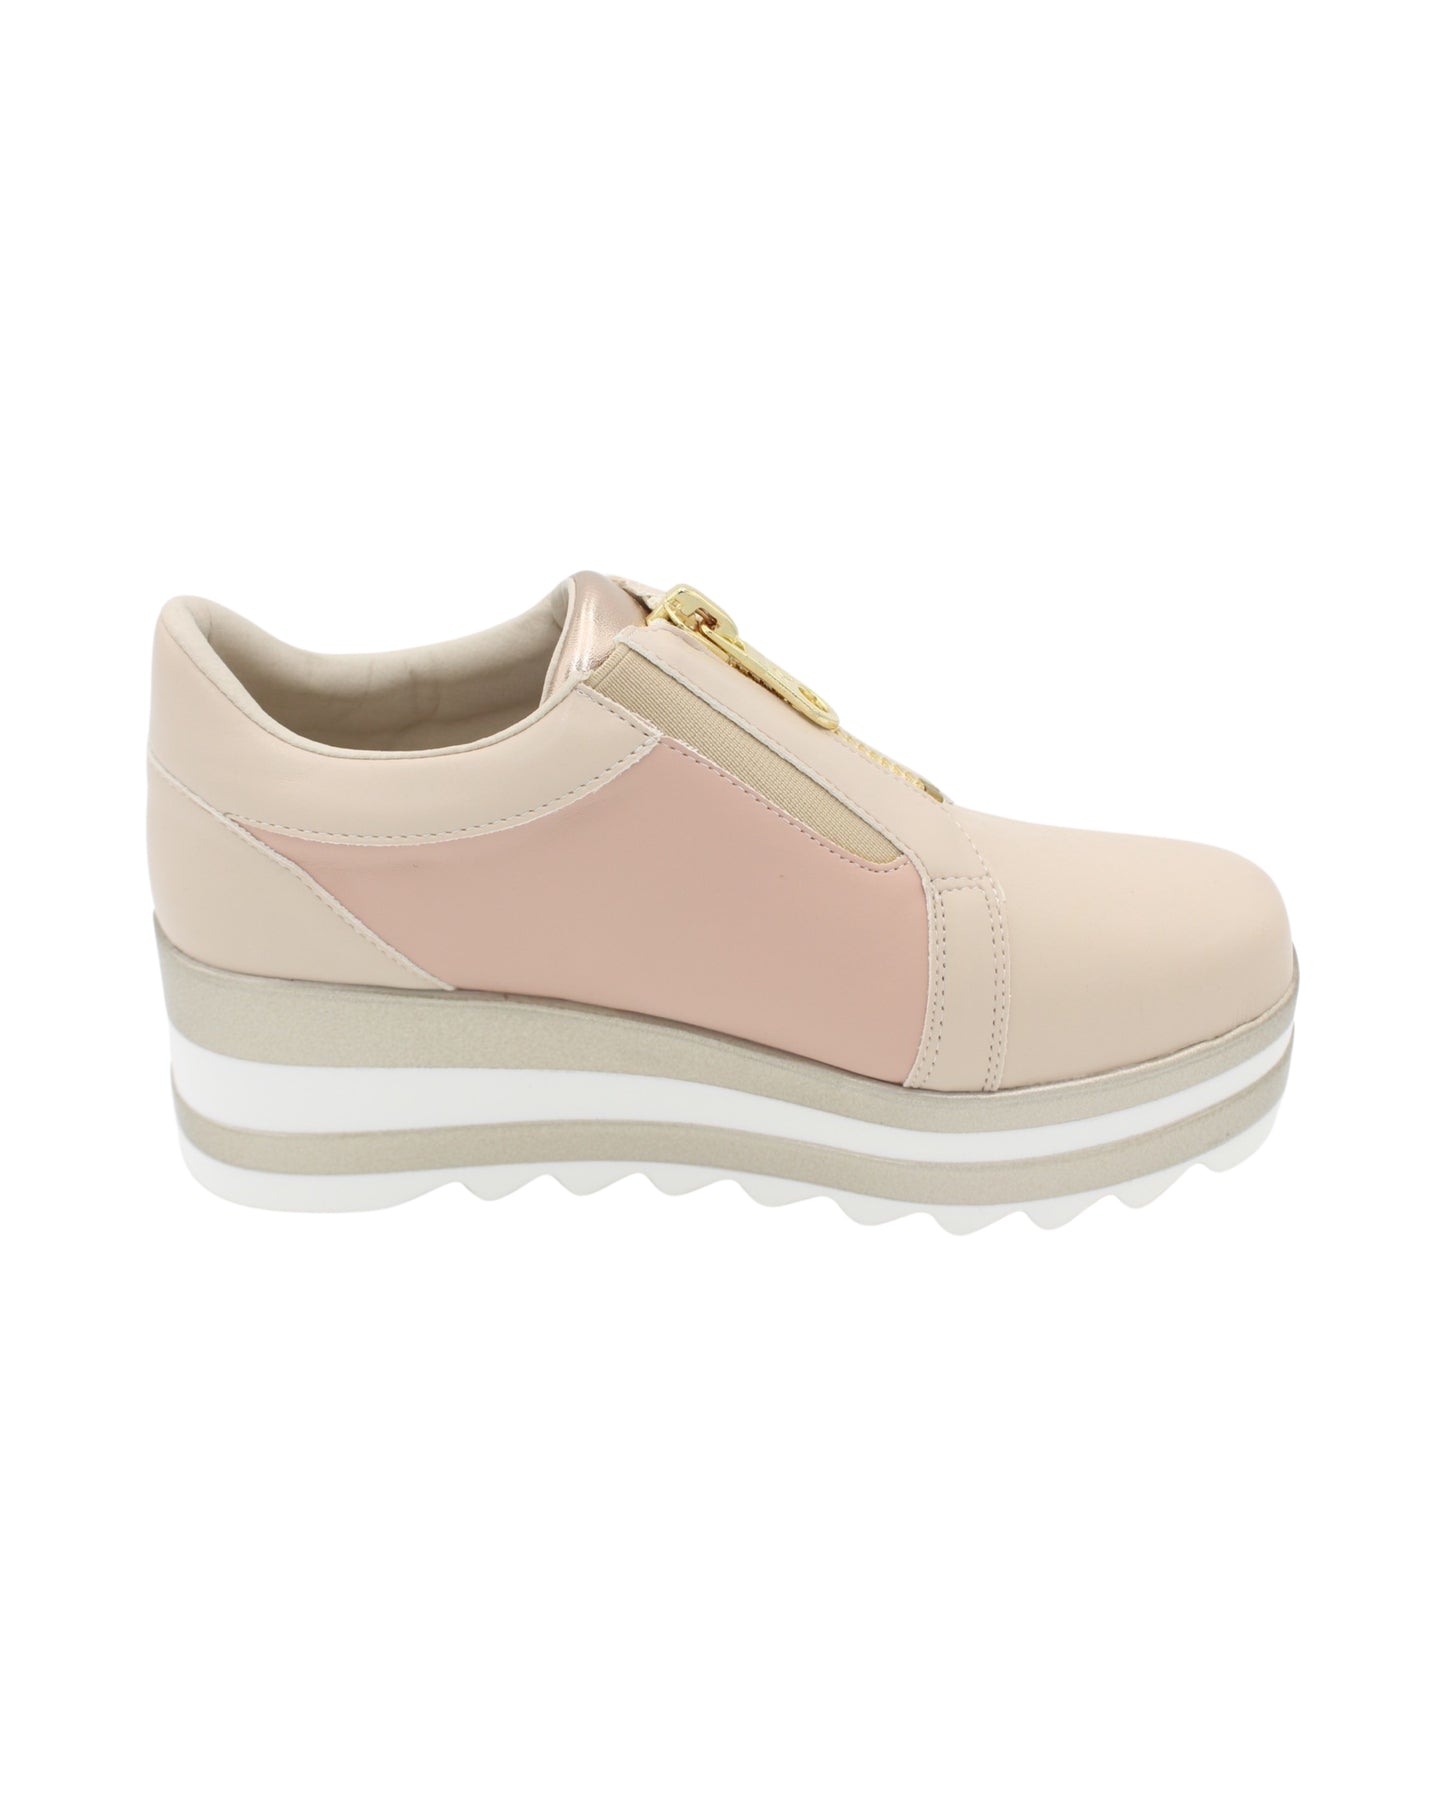 Kate Appleby - Ladies Shoes Trainers Blush Mix (2280)